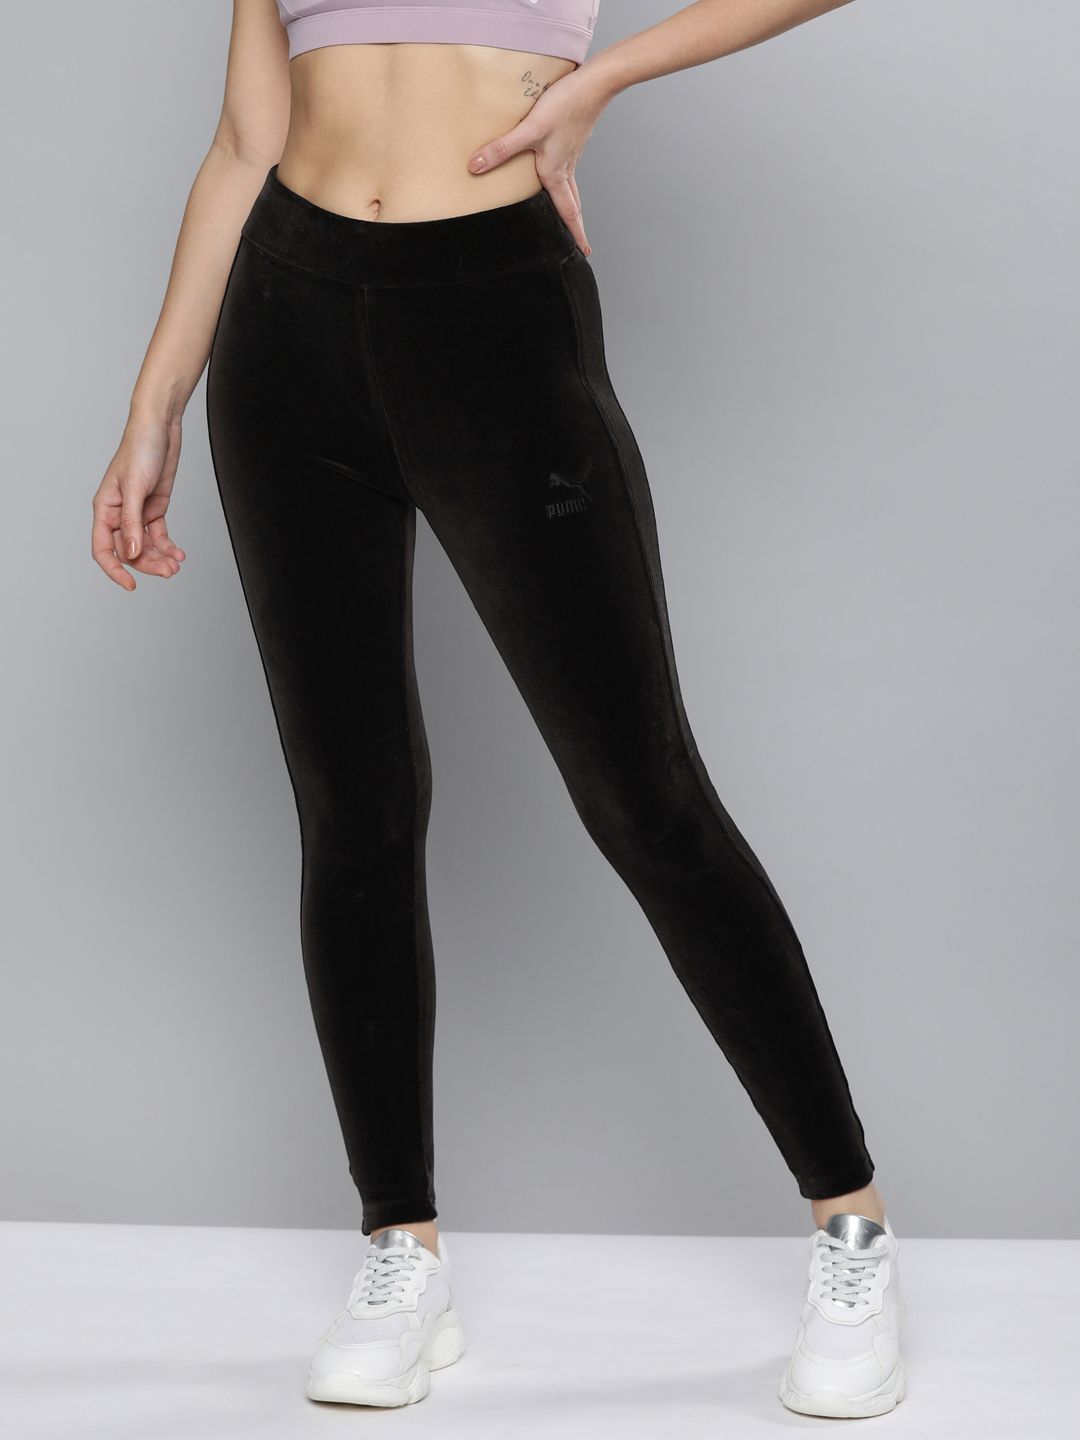 Puma Women Black Solid Iconic T7 Velour High Waist Tights Price in India